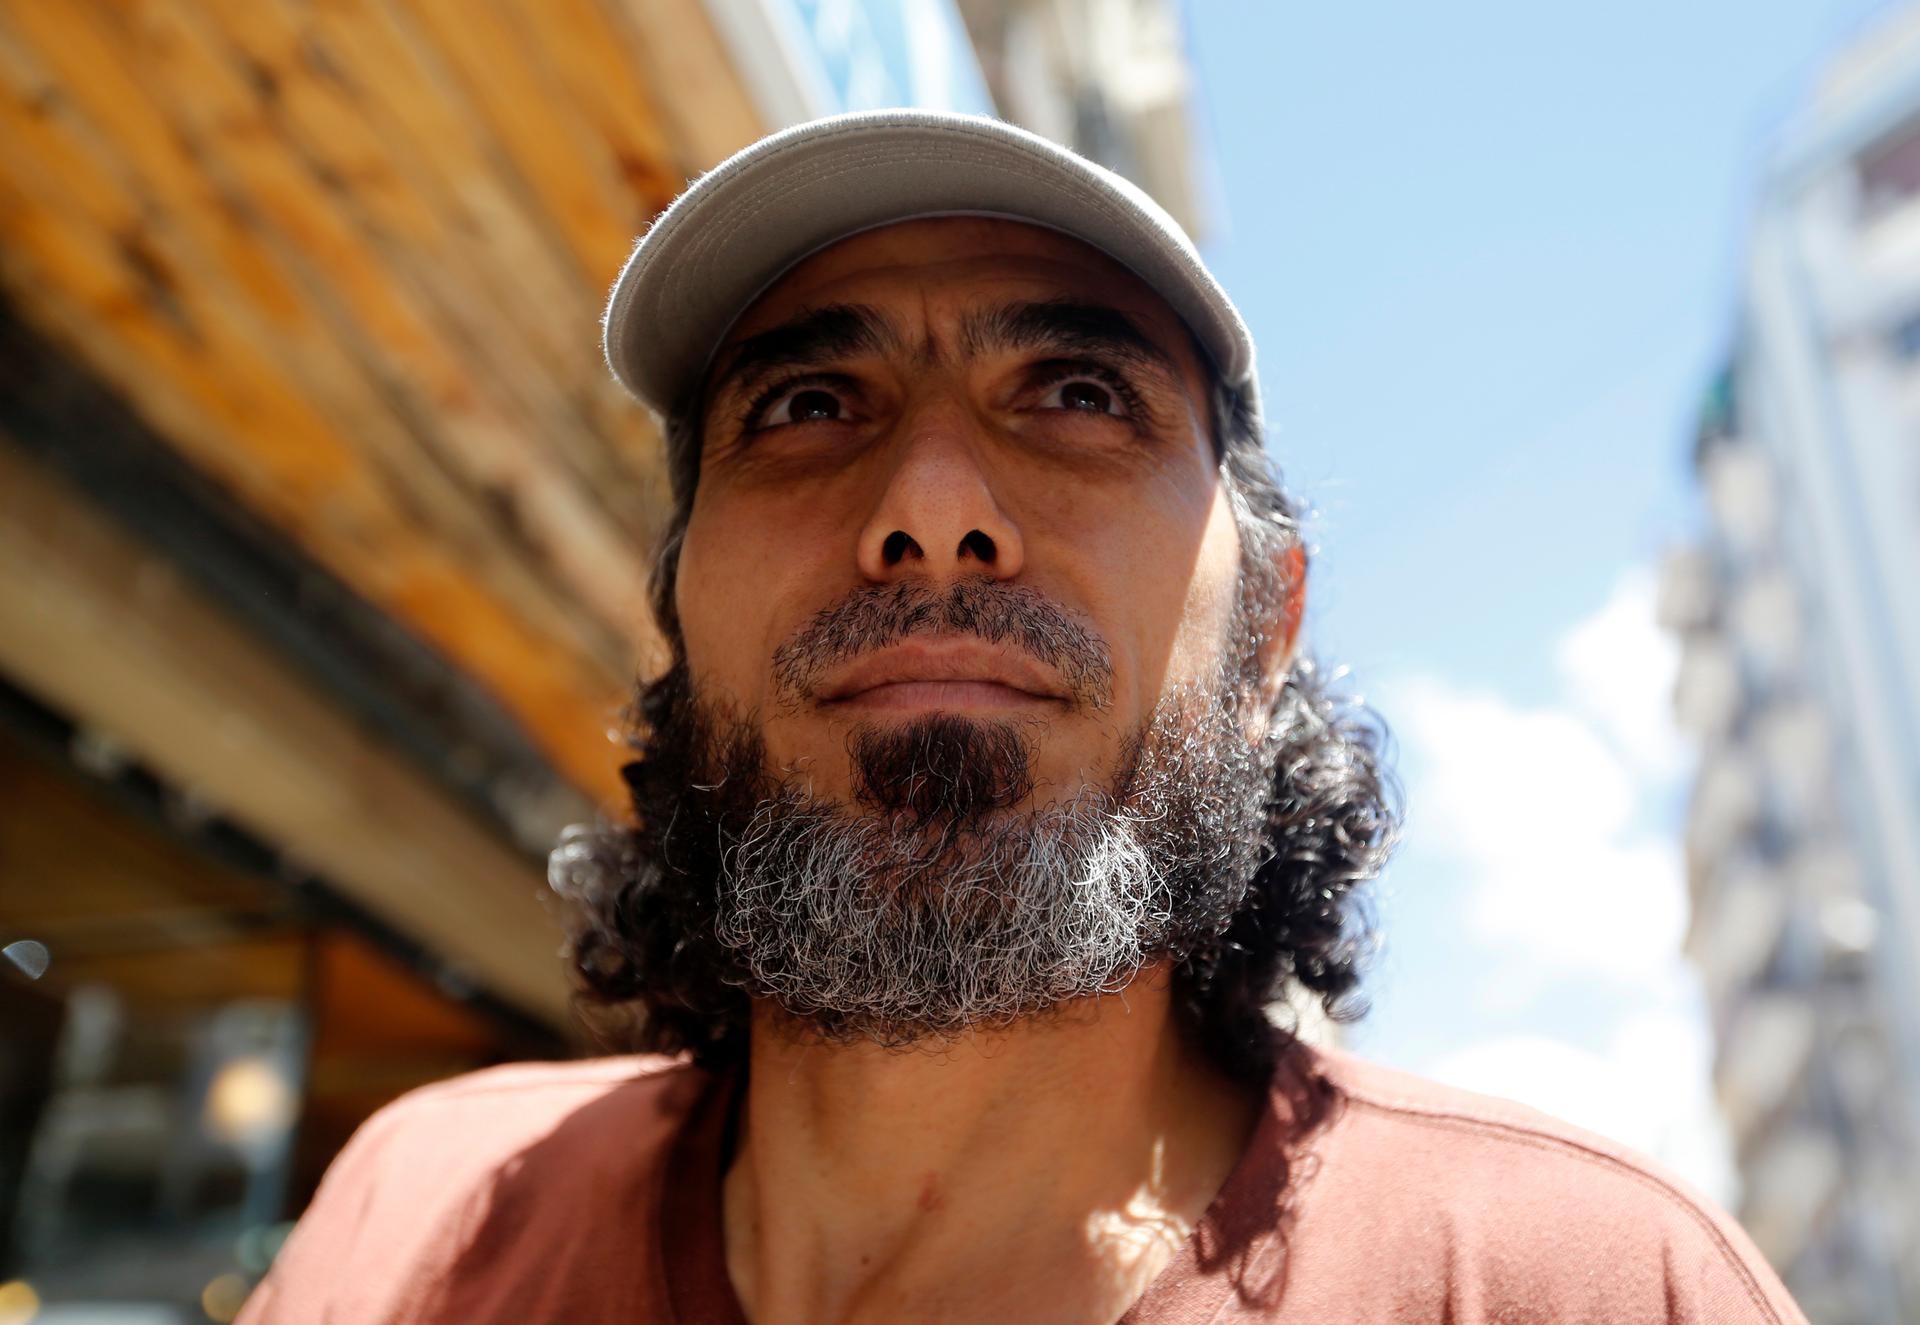 Former Guantánamo Bay detainee Abu Wa'el Dhiab looks on as he arrives for an interview in Buenos Aires on Feb. 13, 2015.